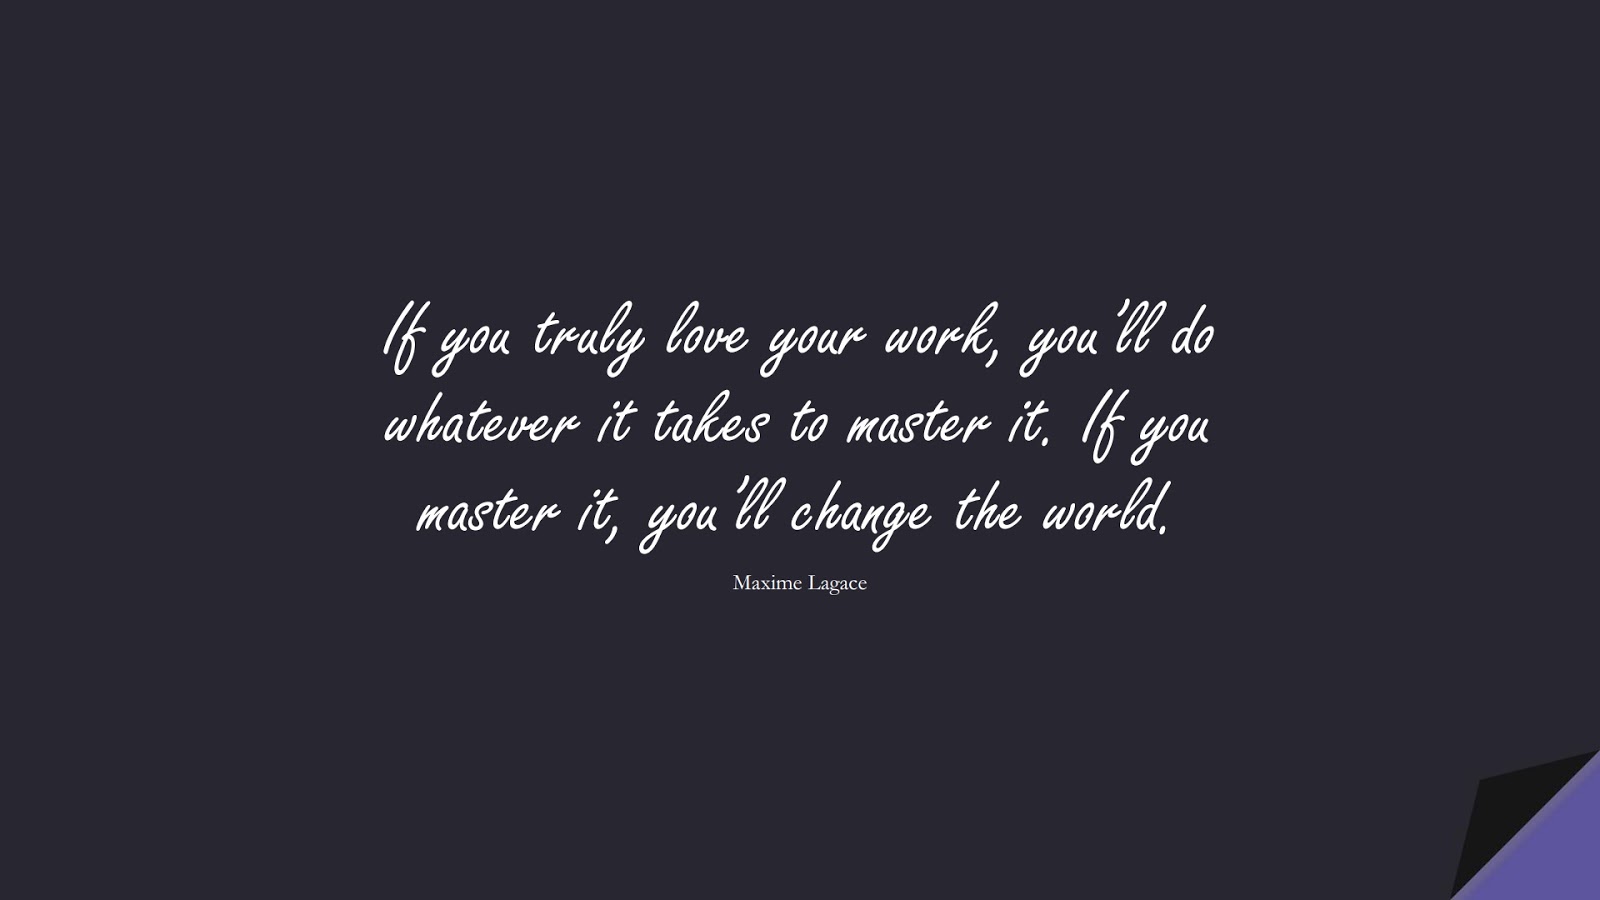 If you truly love your work, you’ll do whatever it takes to master it. If you master it, you’ll change the world. (Maxime Lagace);  #LoveQuotes